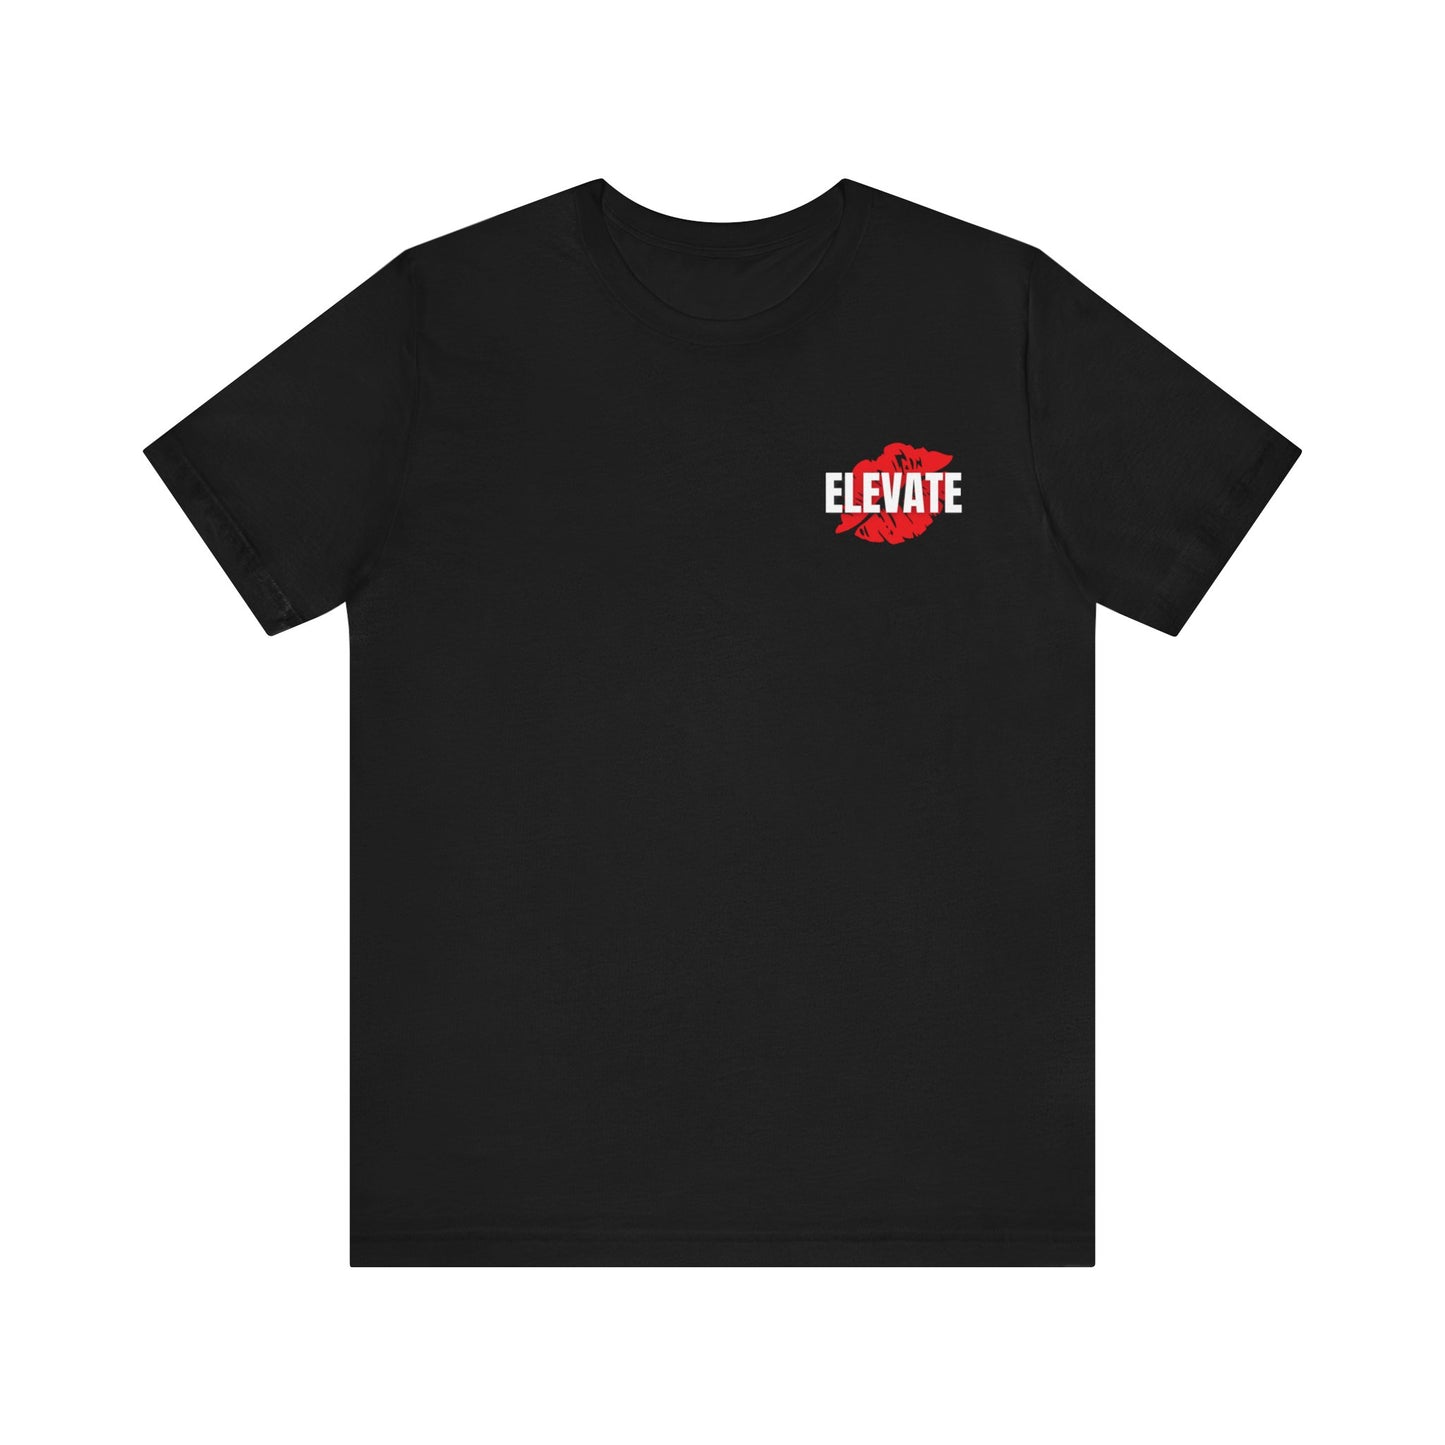 "ELEVATE YOUR LIFESTYLE" Graphic T-Shirt